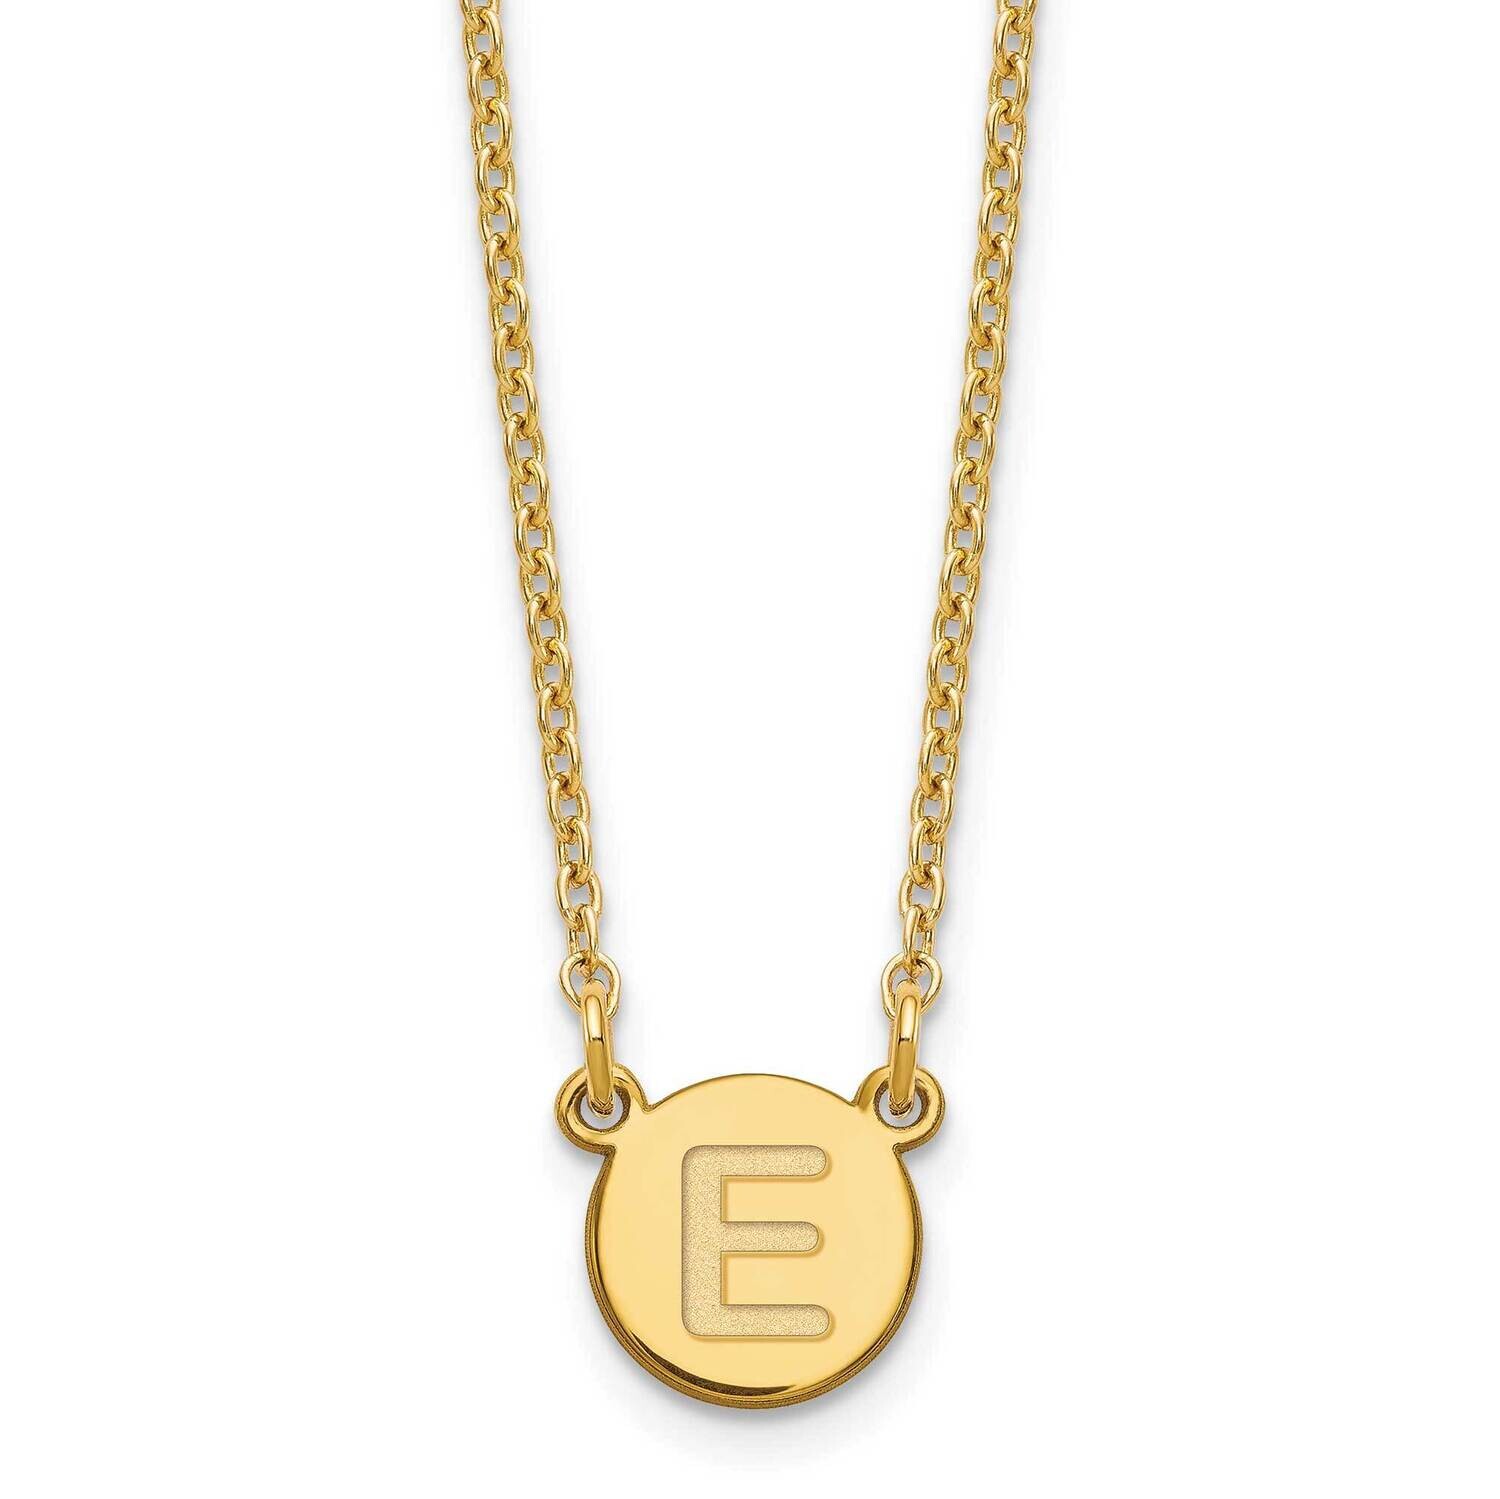 Gold-Plated Tiny Circle Block Letter E Initial Necklace Sterling Silver XNA722GP/E